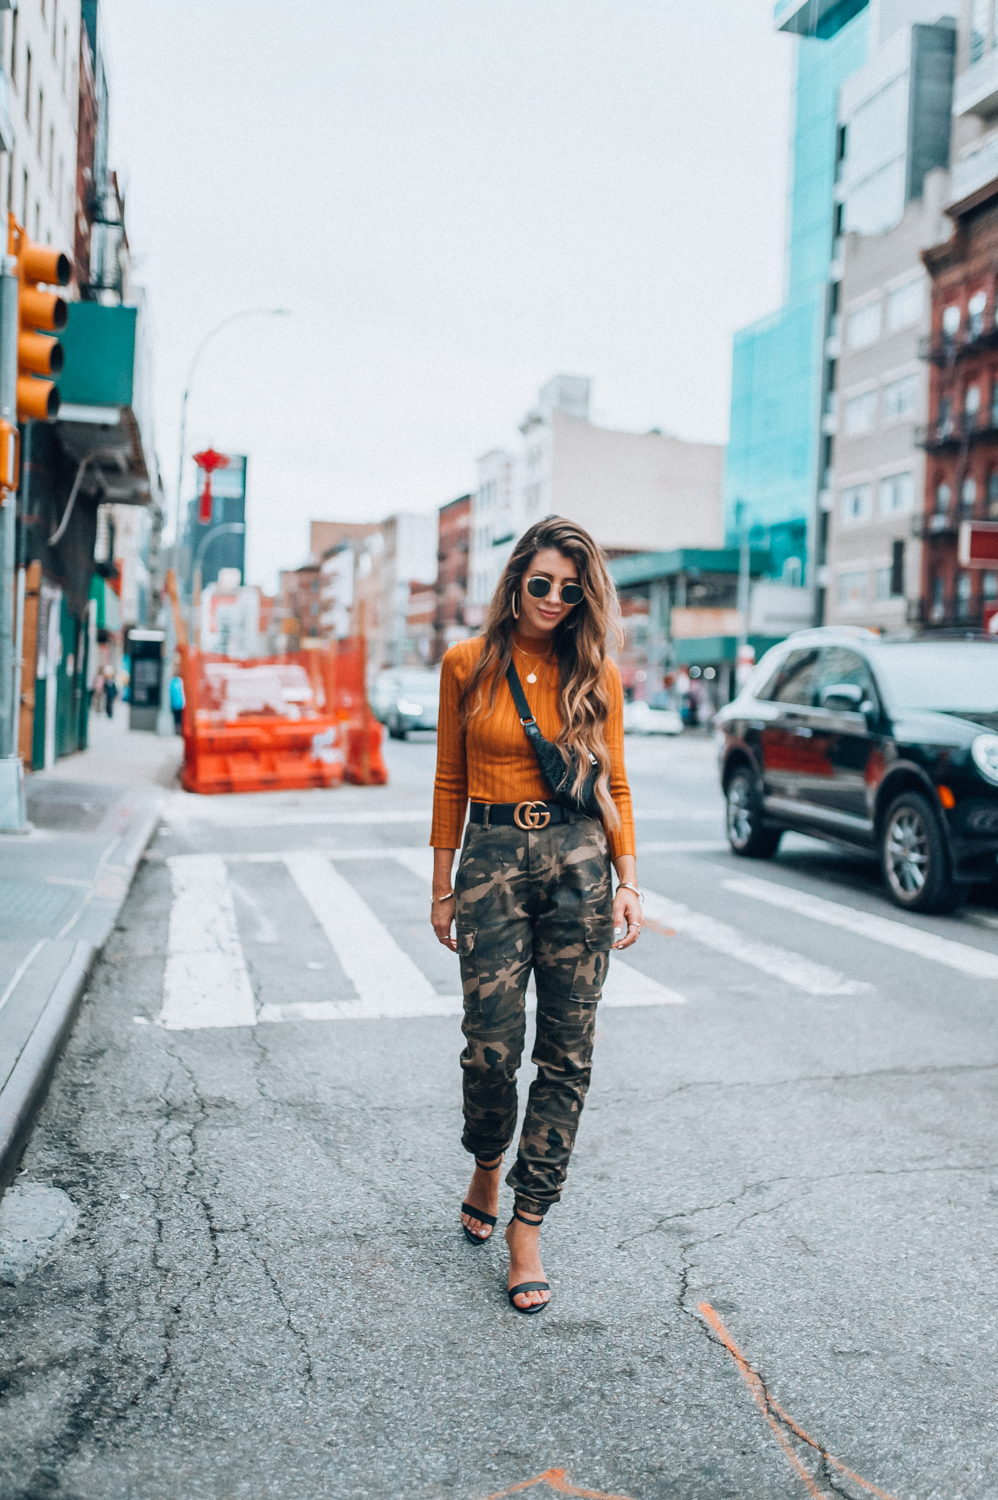 New York Fashion Week Trends: Camo pants featured by popular San Francisco fashion blogger, The Girl in the Yellow Dress